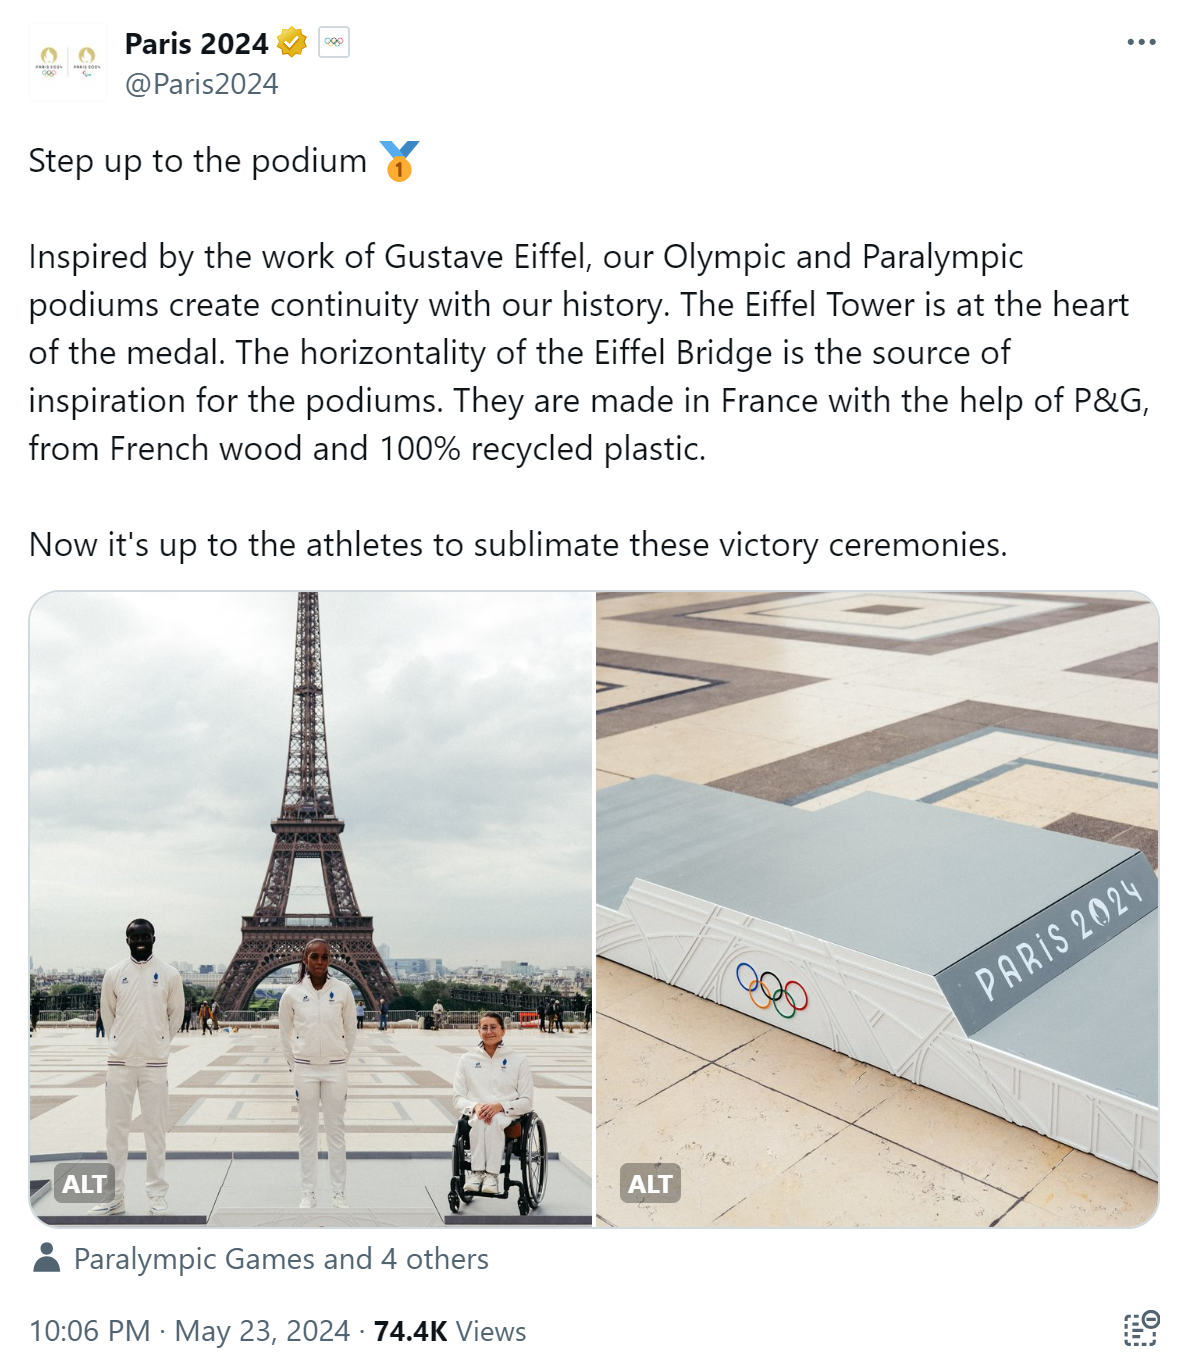 Paris 2024's tweet on May 23 about the Olympic and Paralympic podiums. /@Paris2024